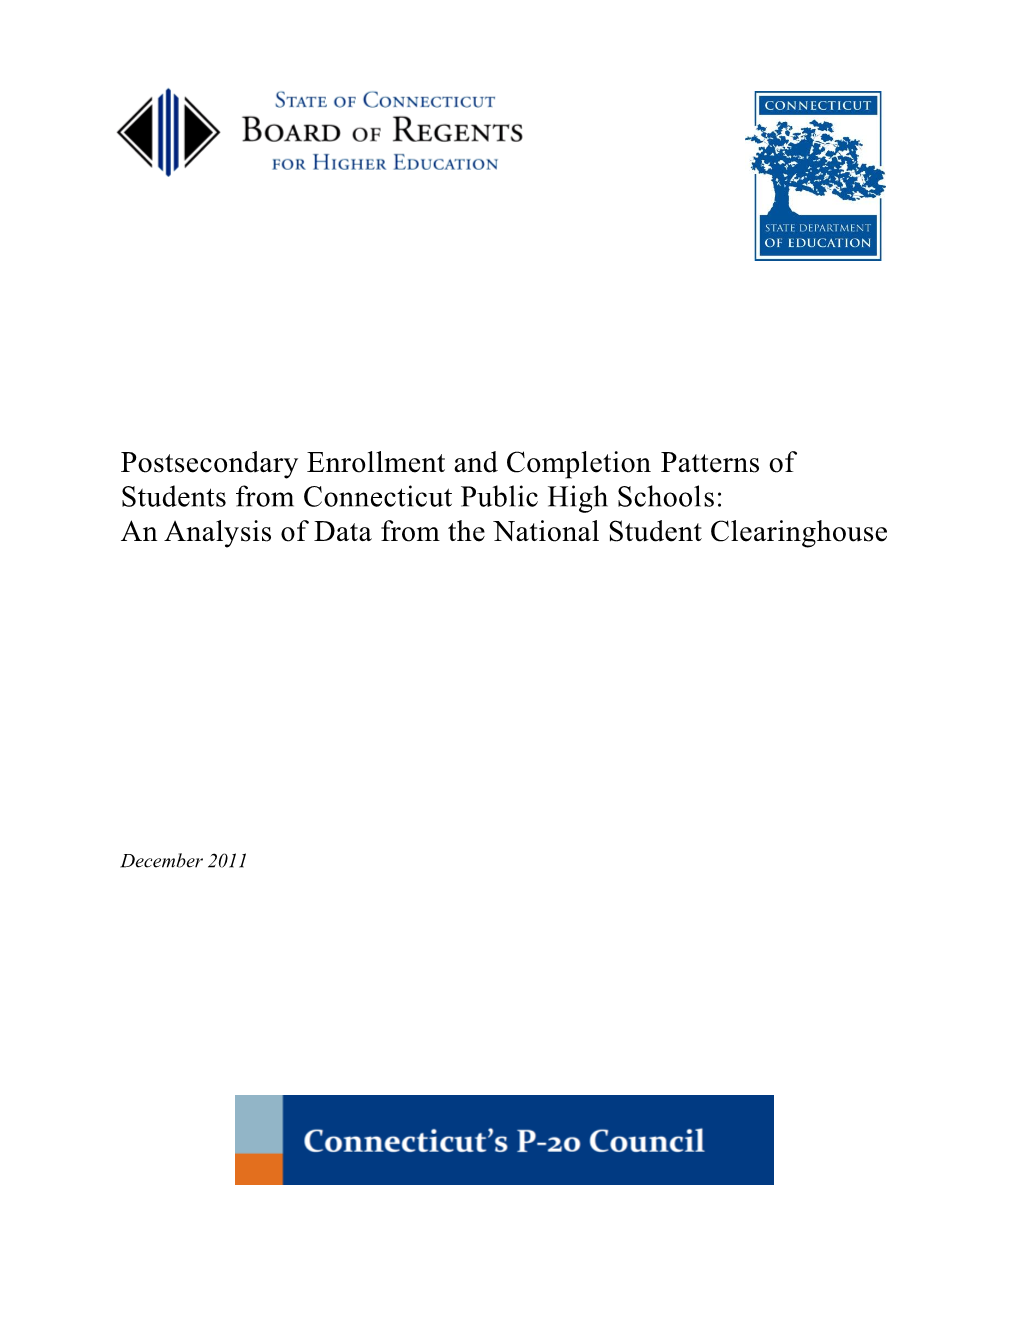 Postsecondary Enrollment and Completion Patterns of Students from Connecticut Public High Schools: an Analysis of Data from the National Student Clearinghouse